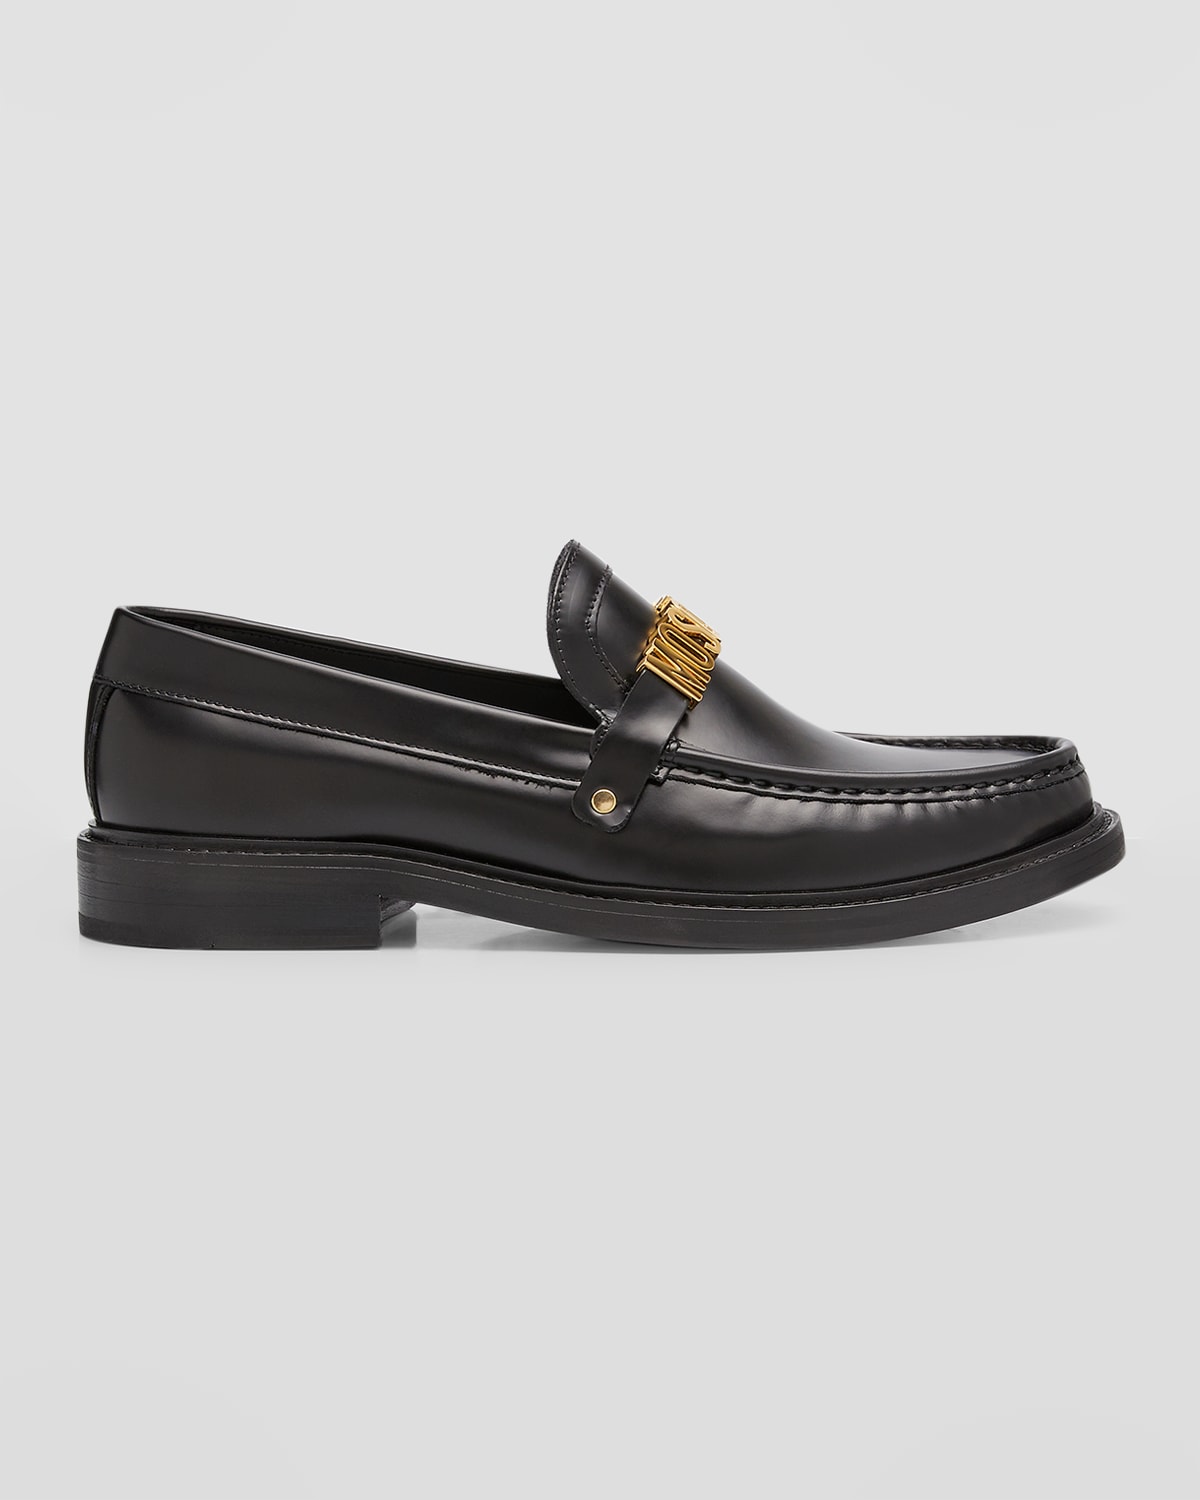 Burberry Men's Vintage Check Leather Penny Loafers | Neiman Marcus